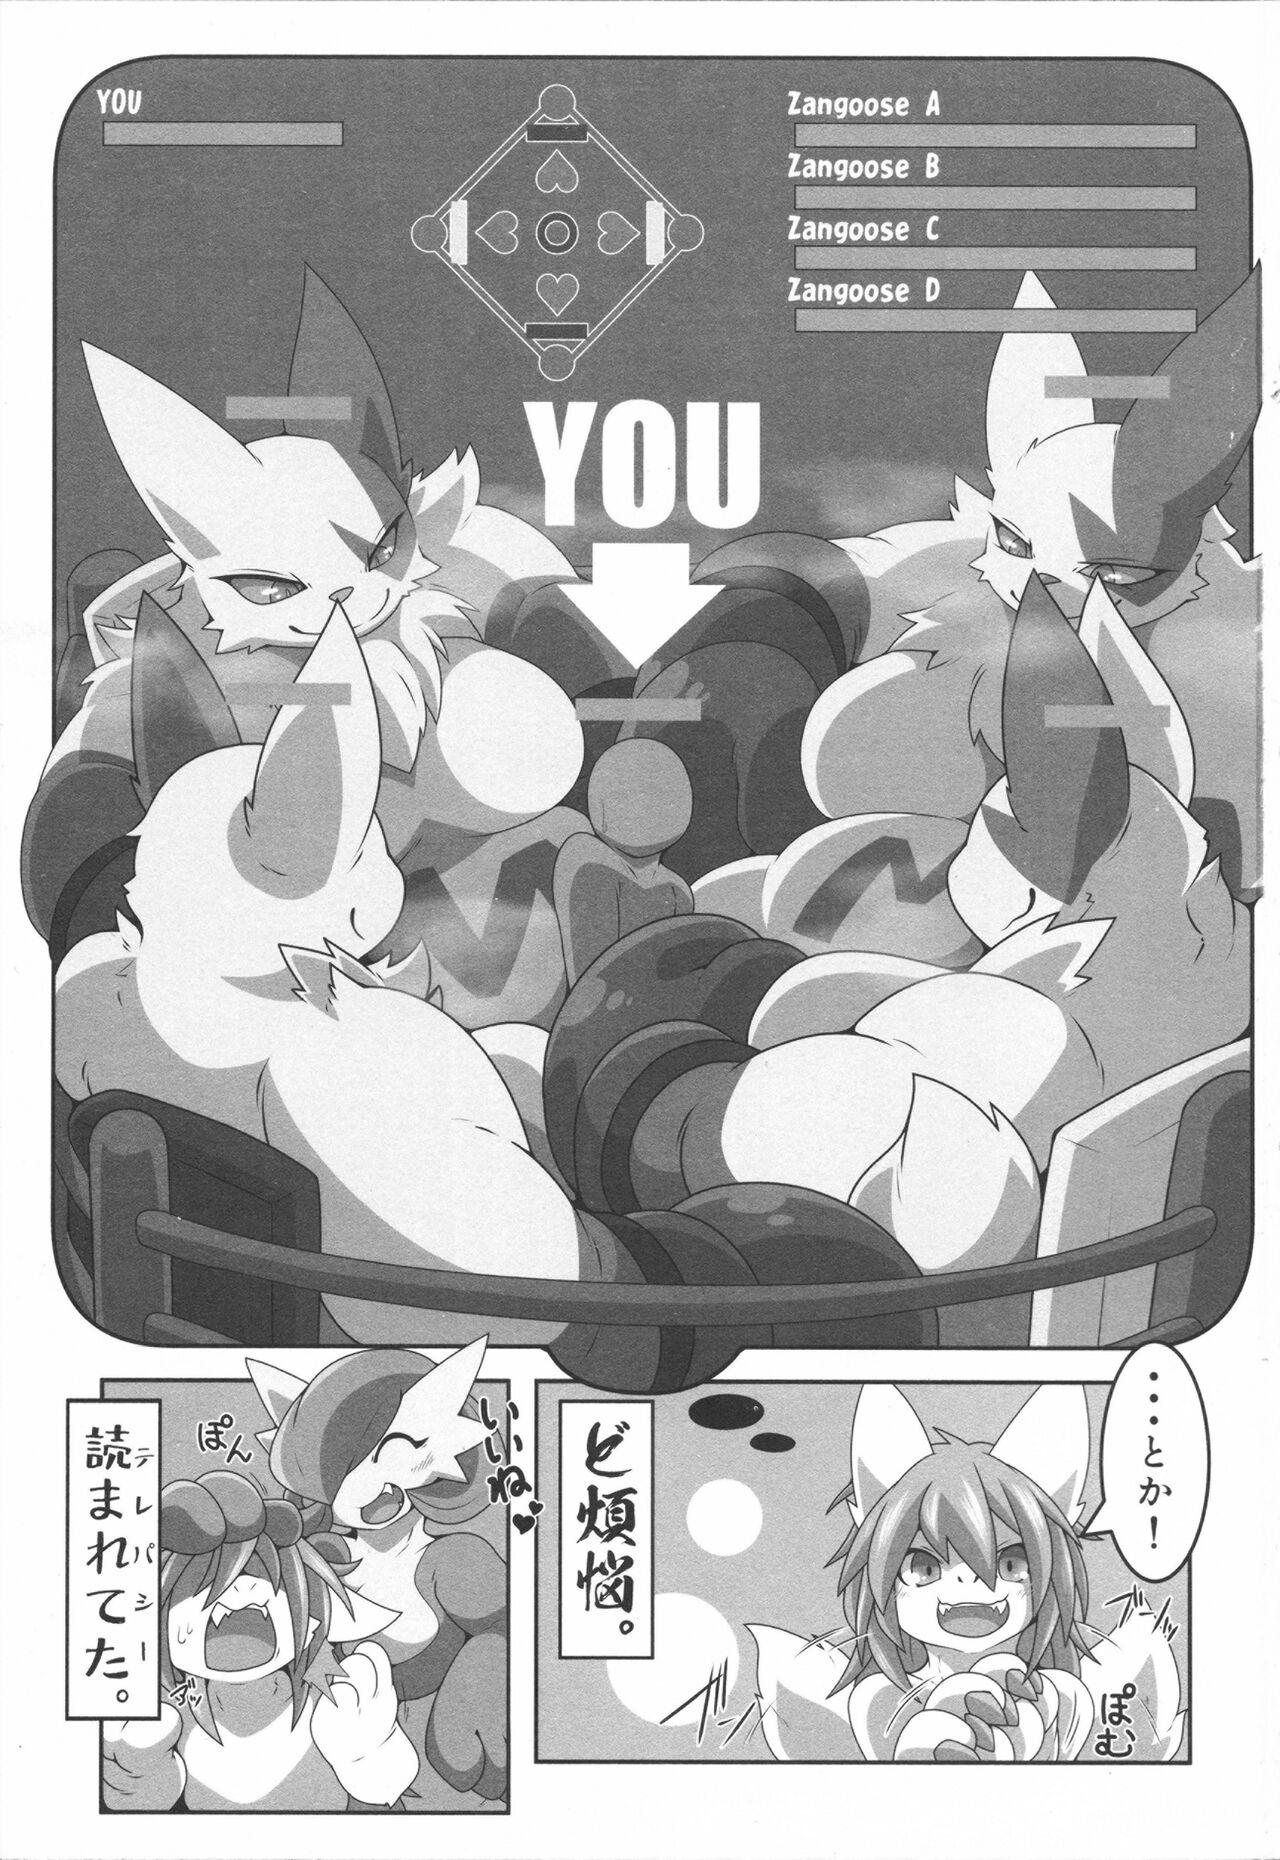 Public Sex Dominated 5 - Pokemon | pocket monsters Stud - Page 2